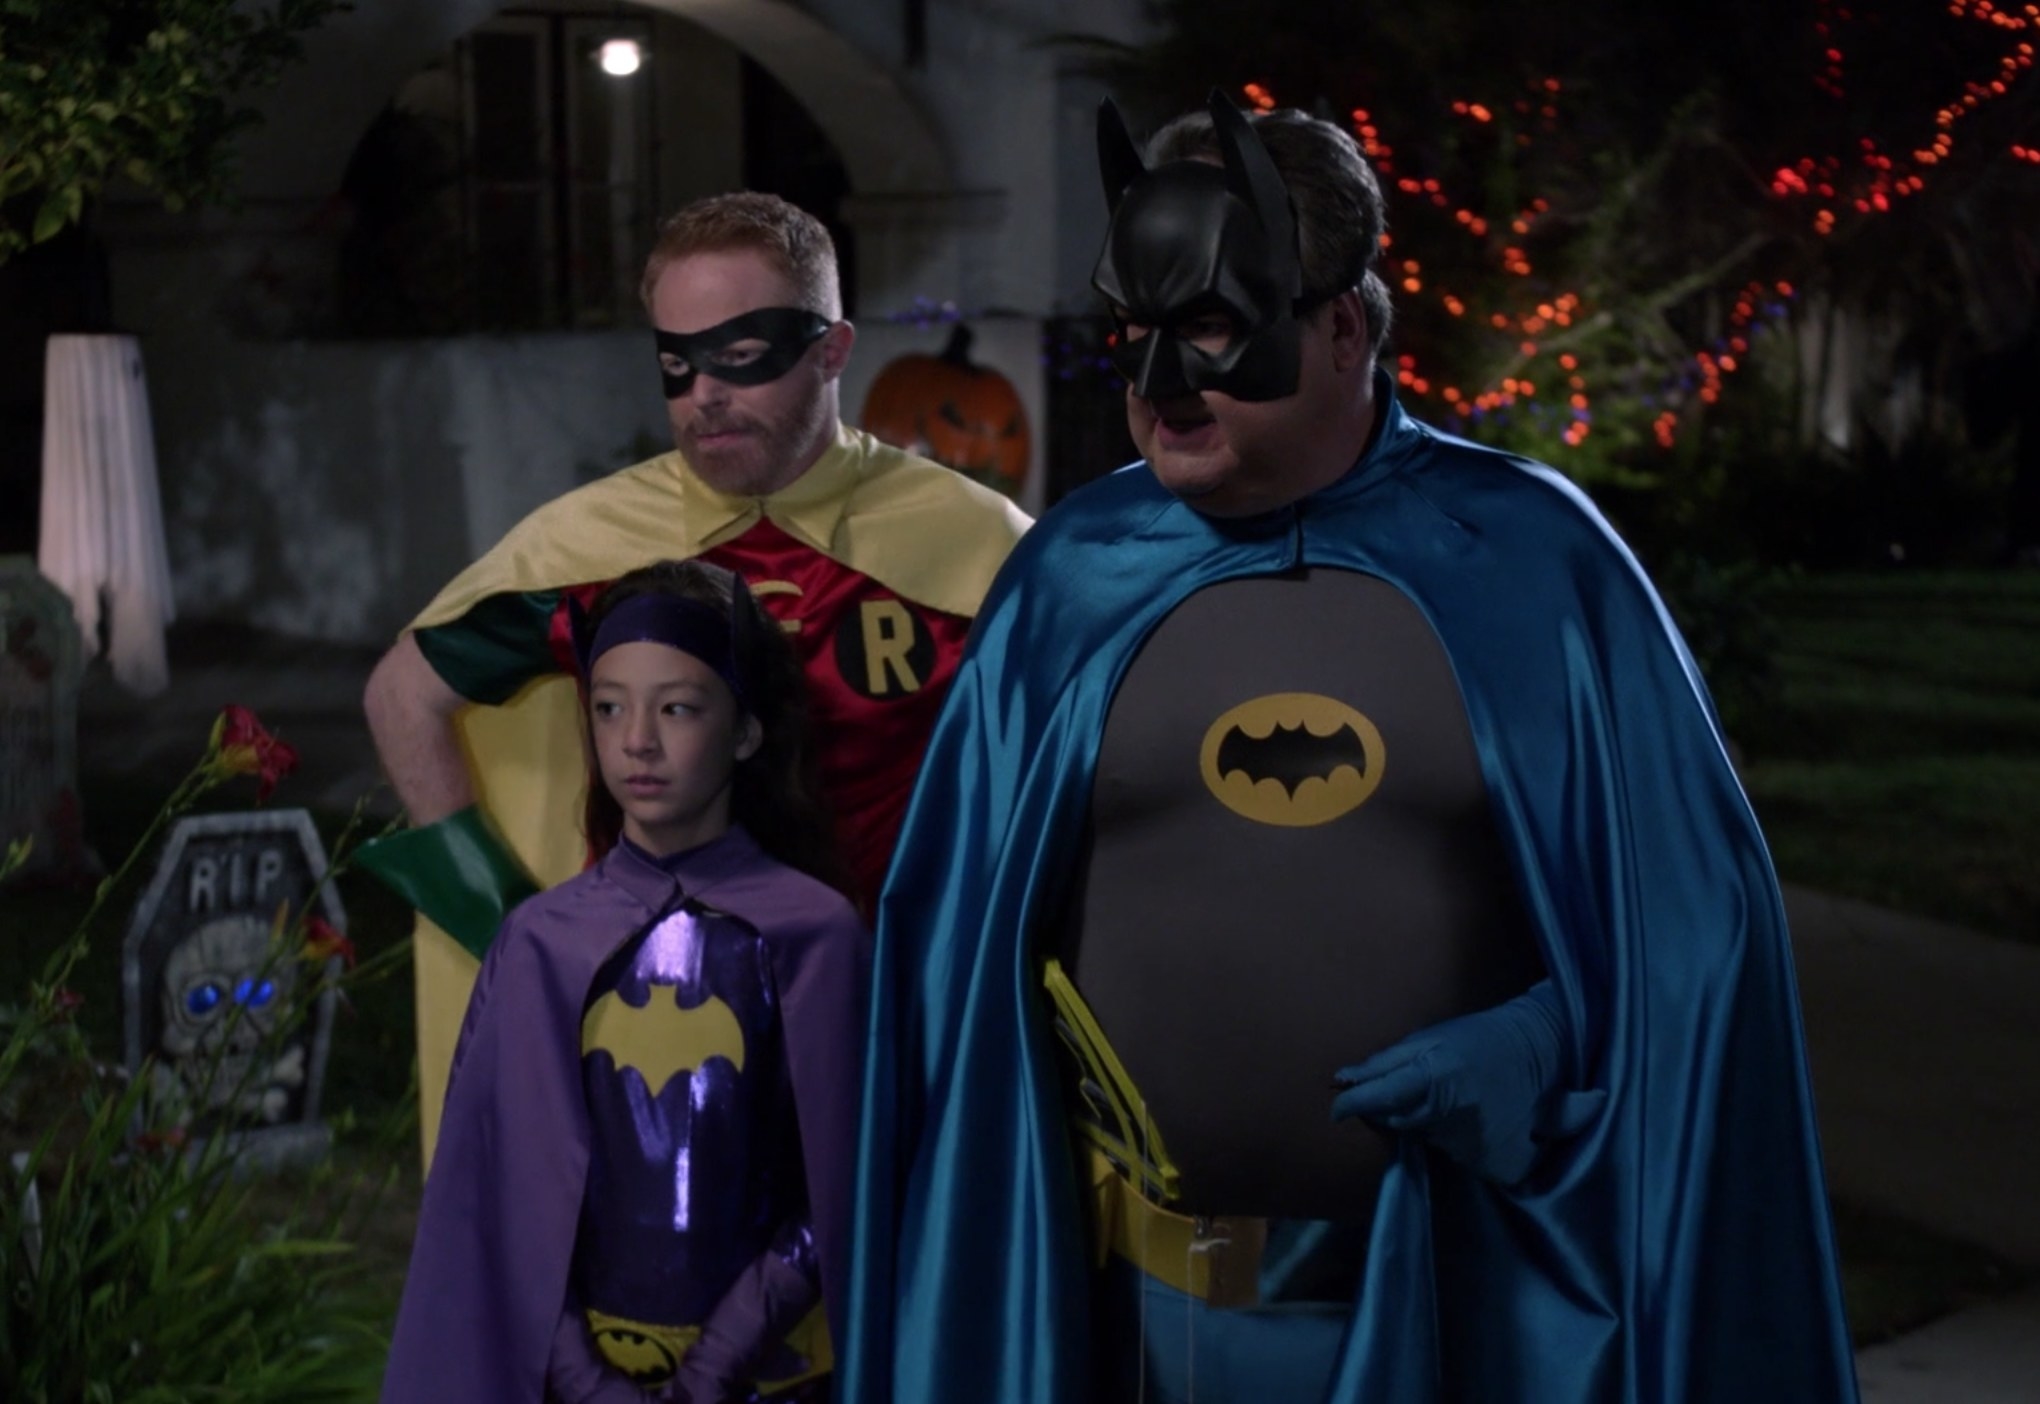 Cam, Mitch and Lily dressed as batman, robin and batgirl